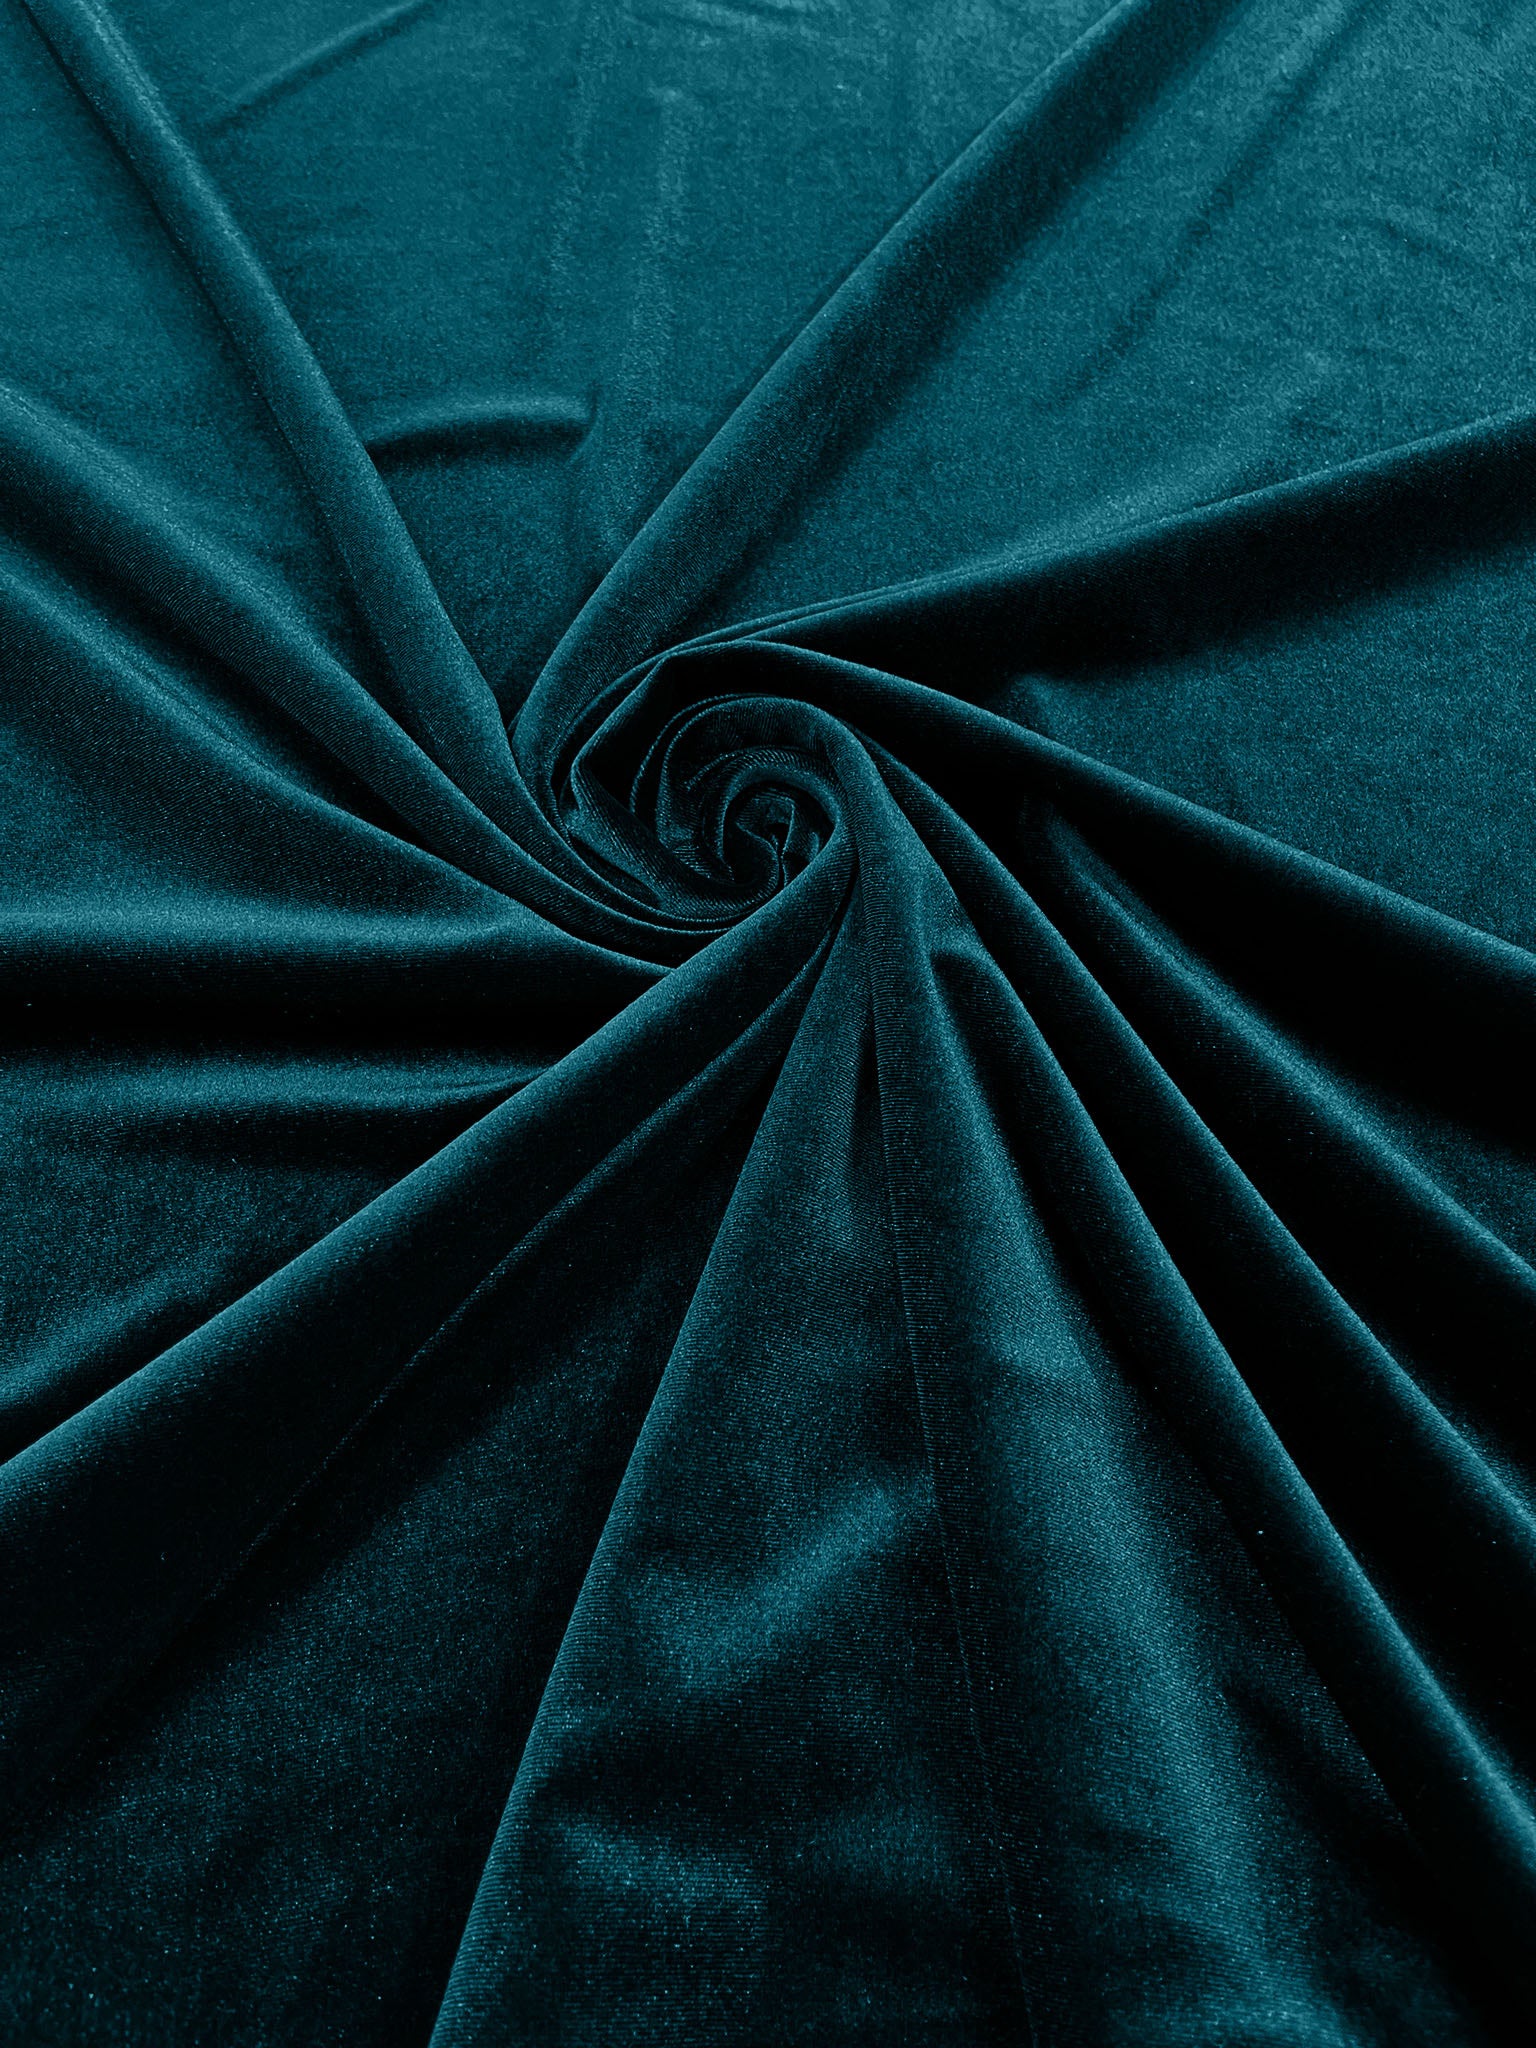 Teal Green Stretch Velvet Polyester Spandex 60" Wide | Plush Velvet For Christmas, Apparel, Cosplay, Curtains, Decoration, Costume